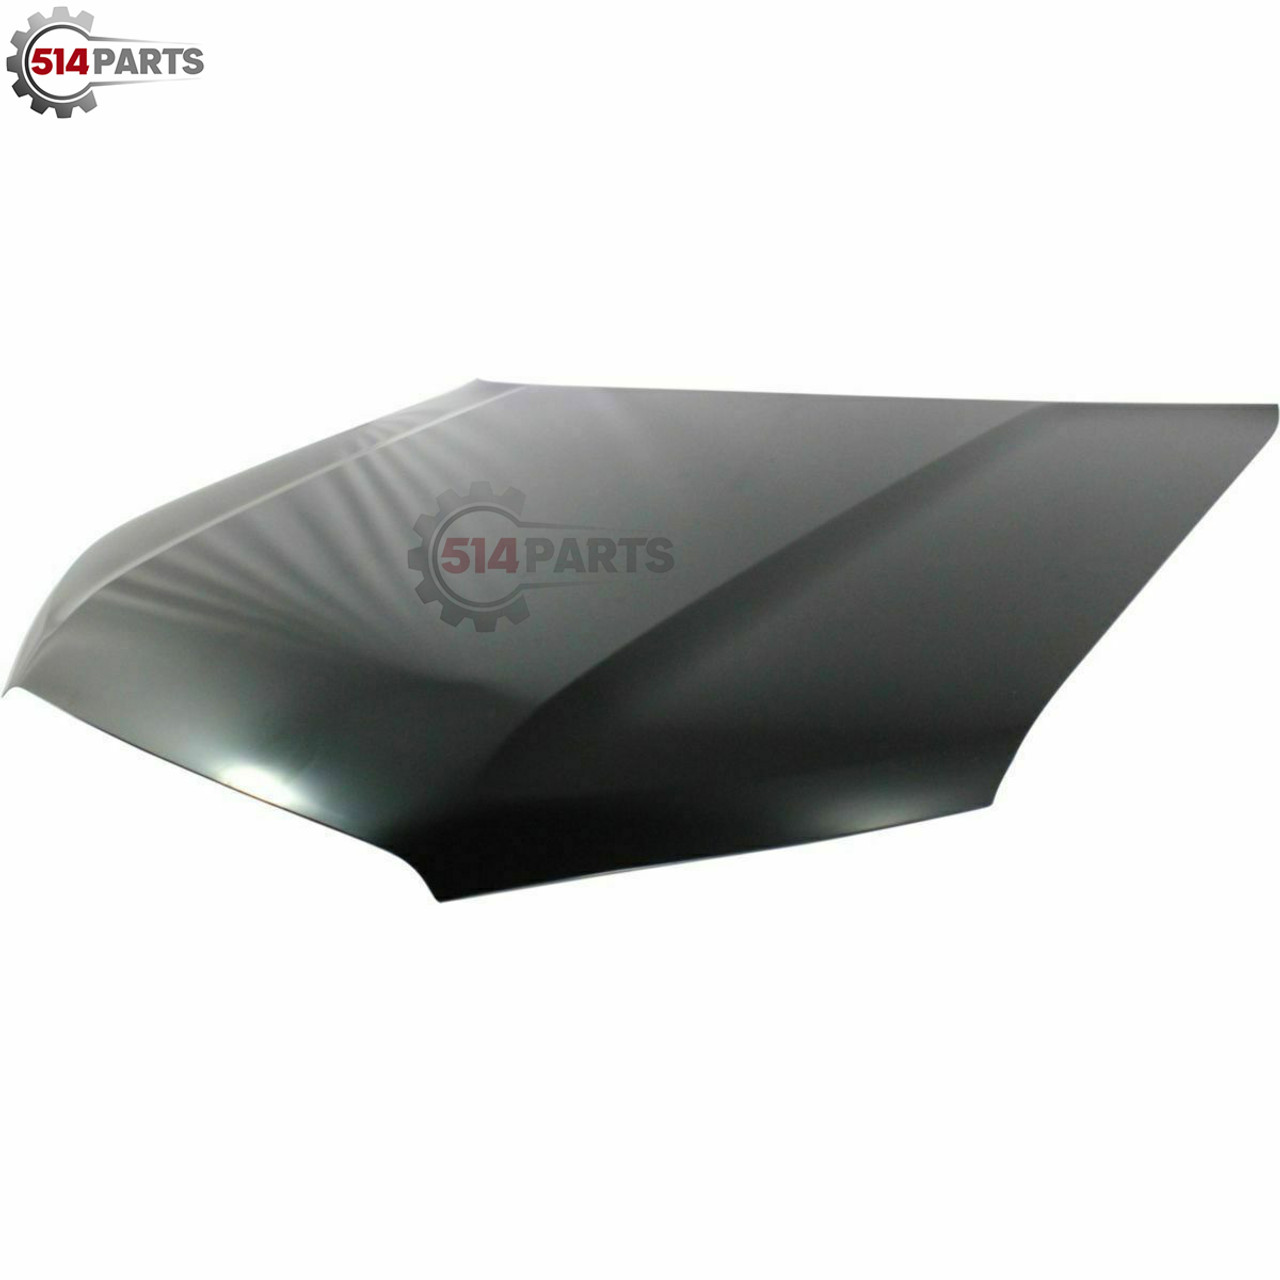 2010 - 2019 TOYOTA 4Runner HOOD without SCOOP - CAPOT